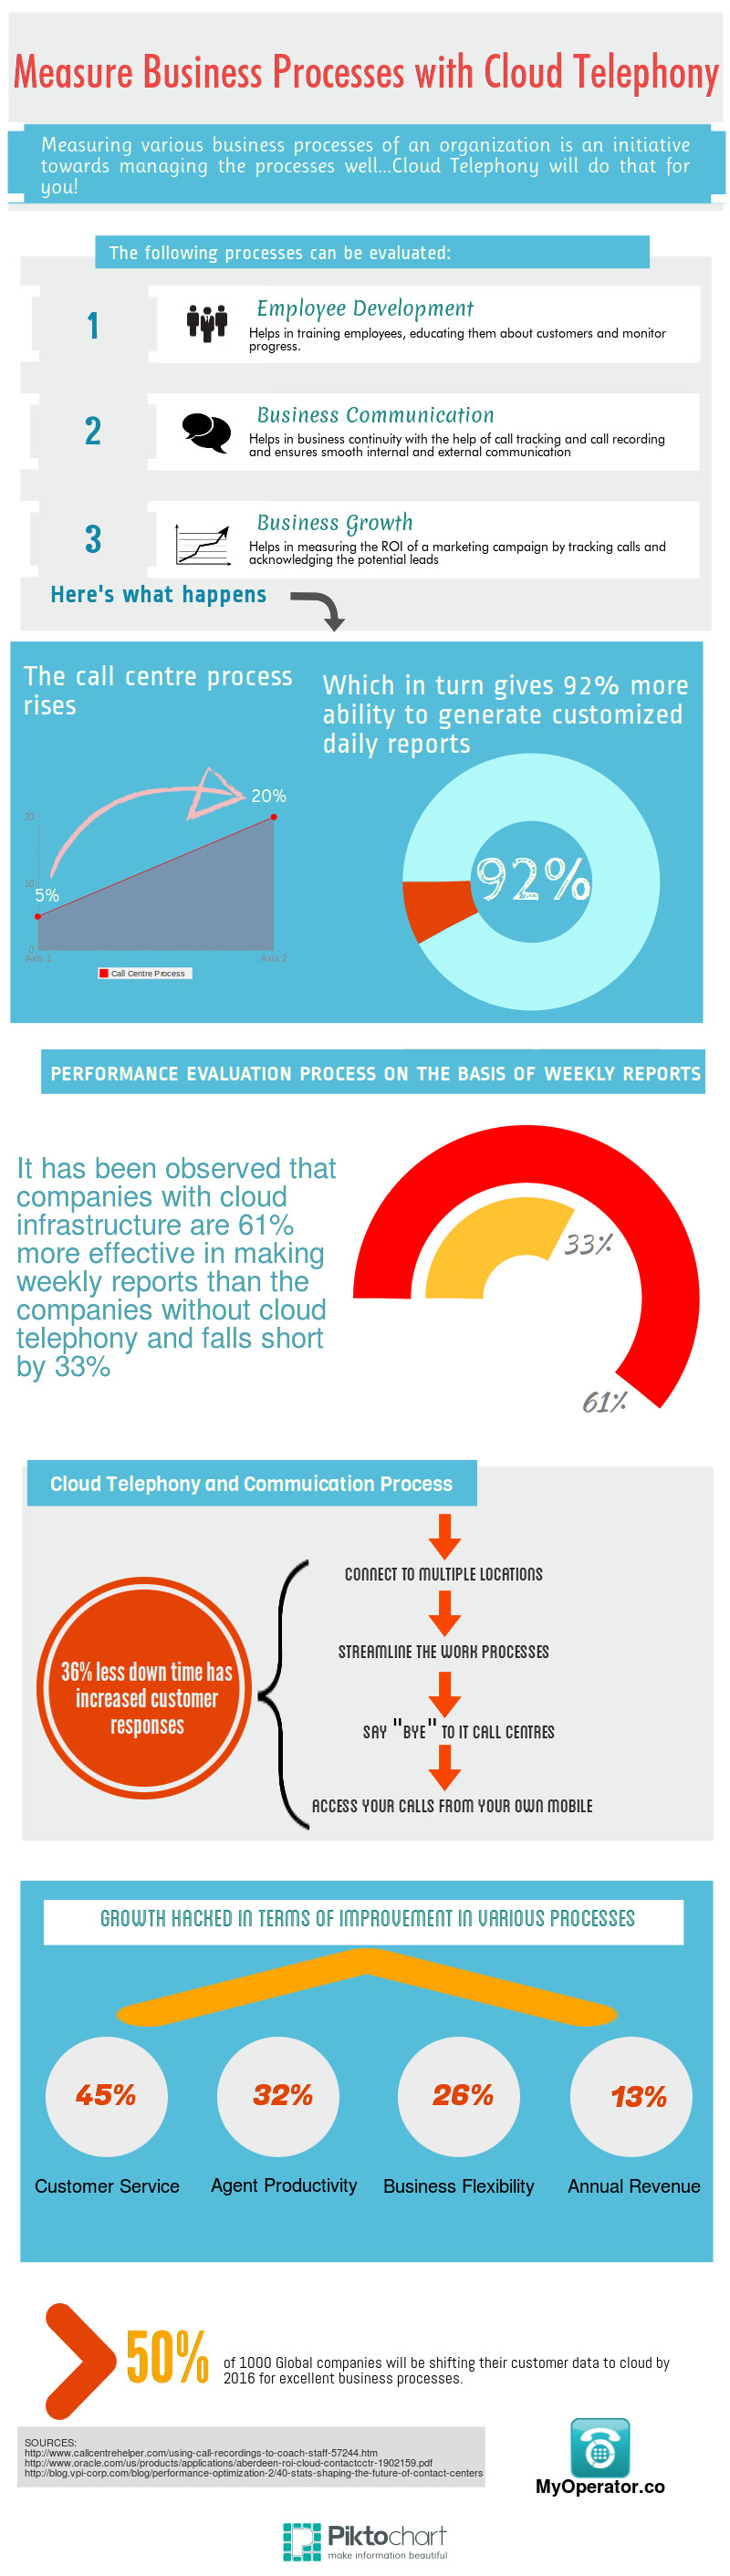 Measure Business Processes with Cloud Telephony